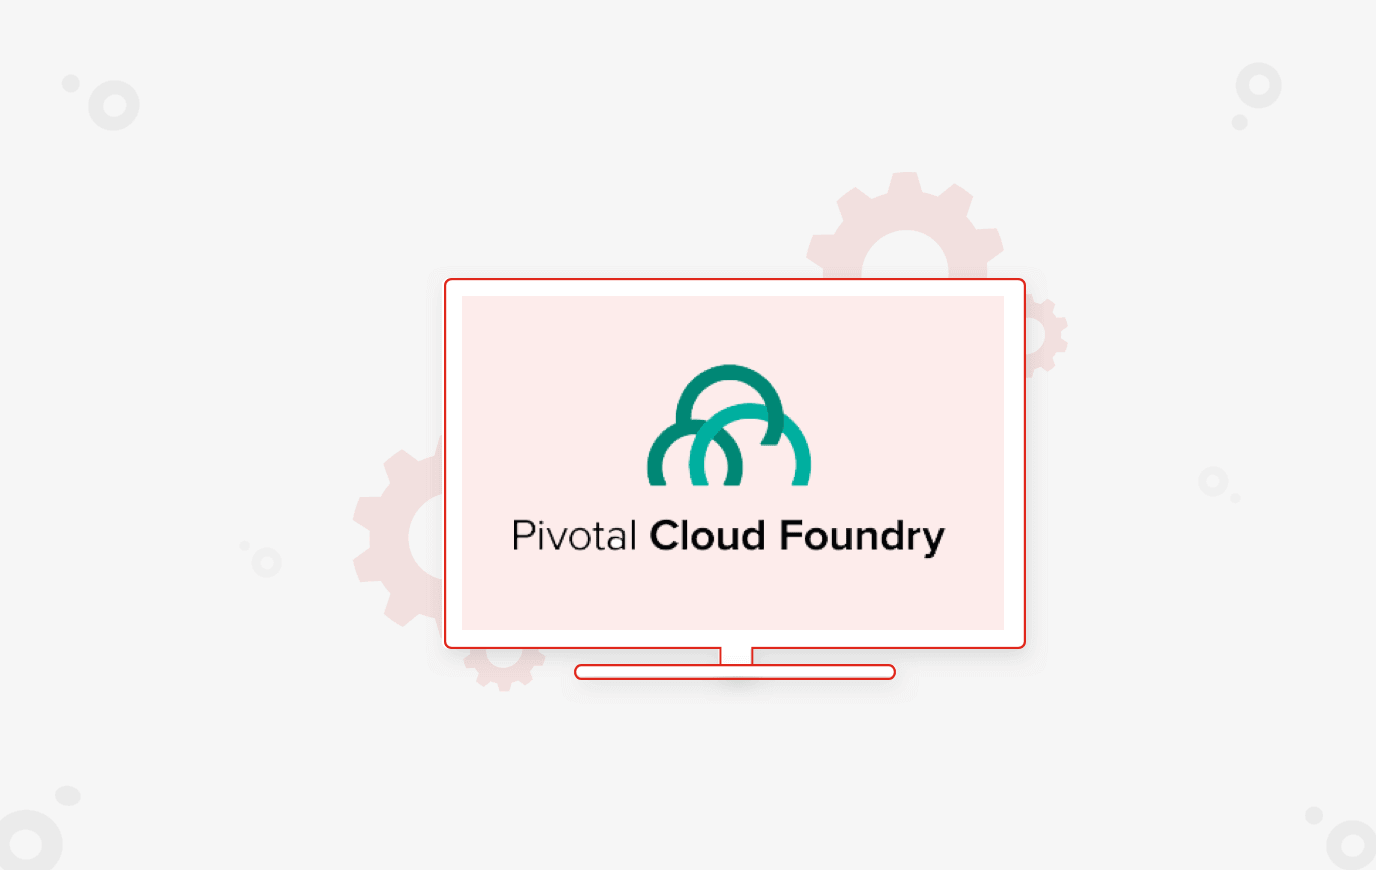 Auto Scaling Applications on Pivotal Cloud Foundry